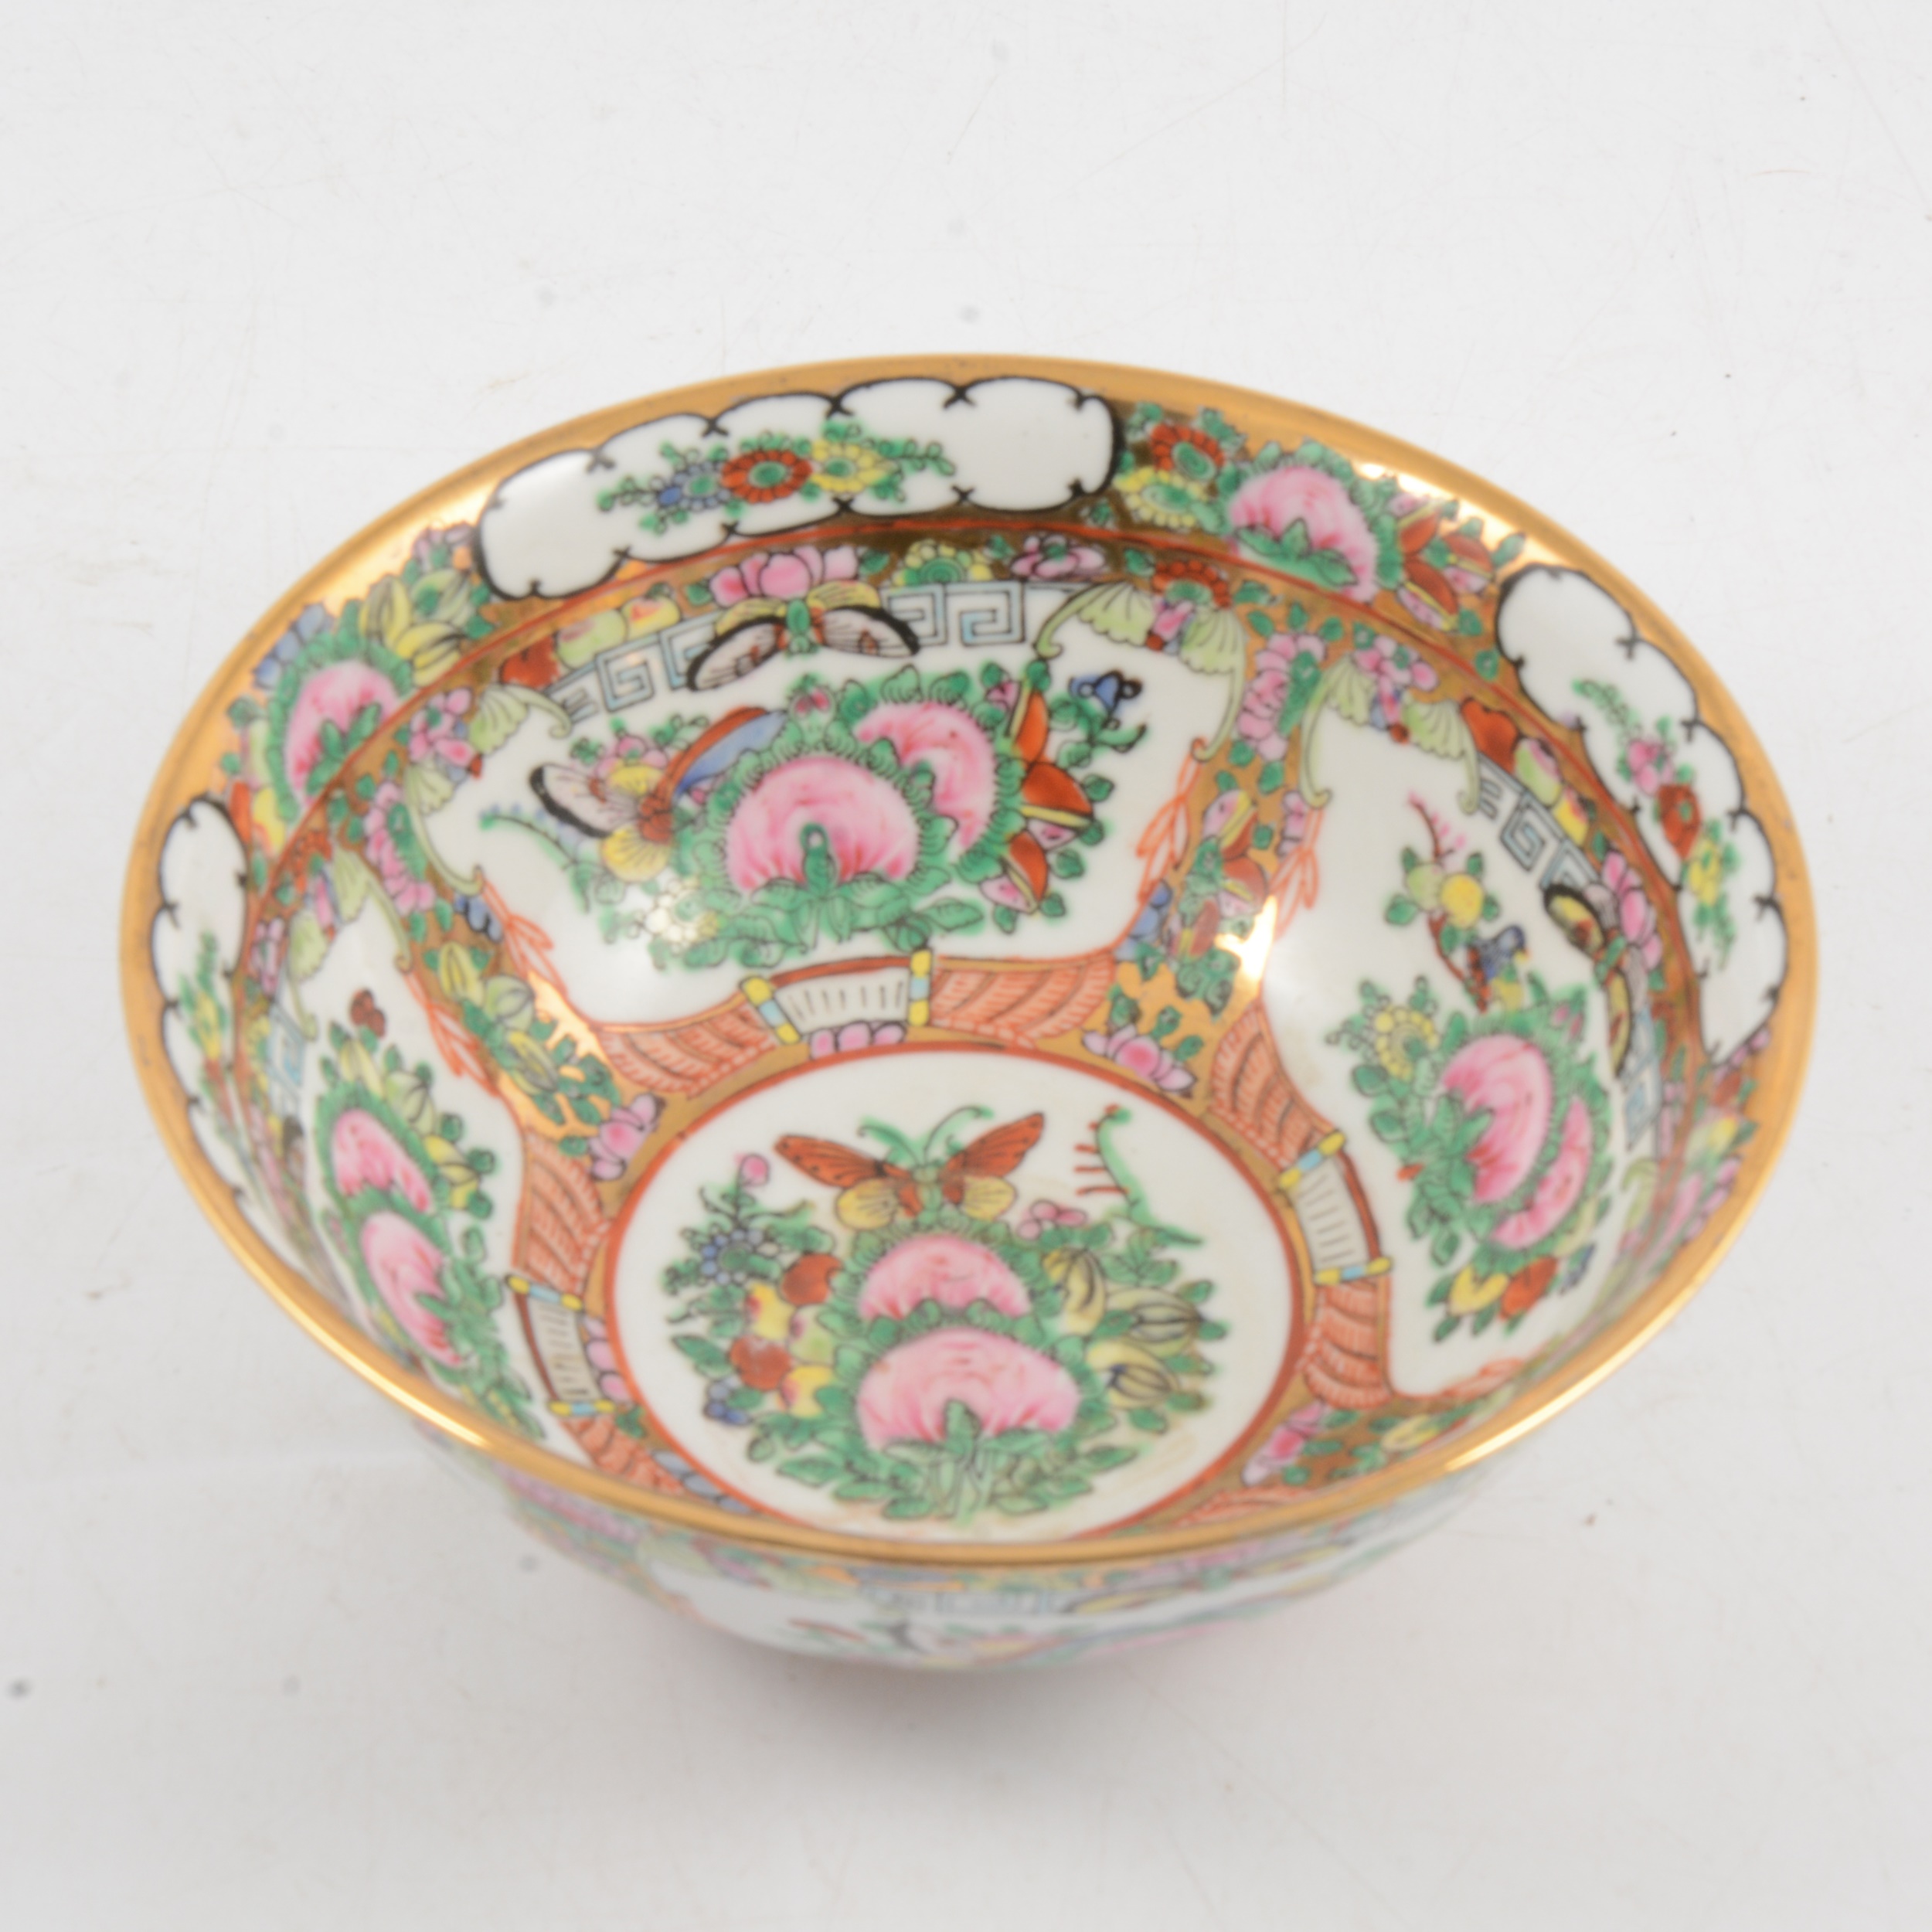 A reproduction Chinese porcelain rosebowl - Image 3 of 5